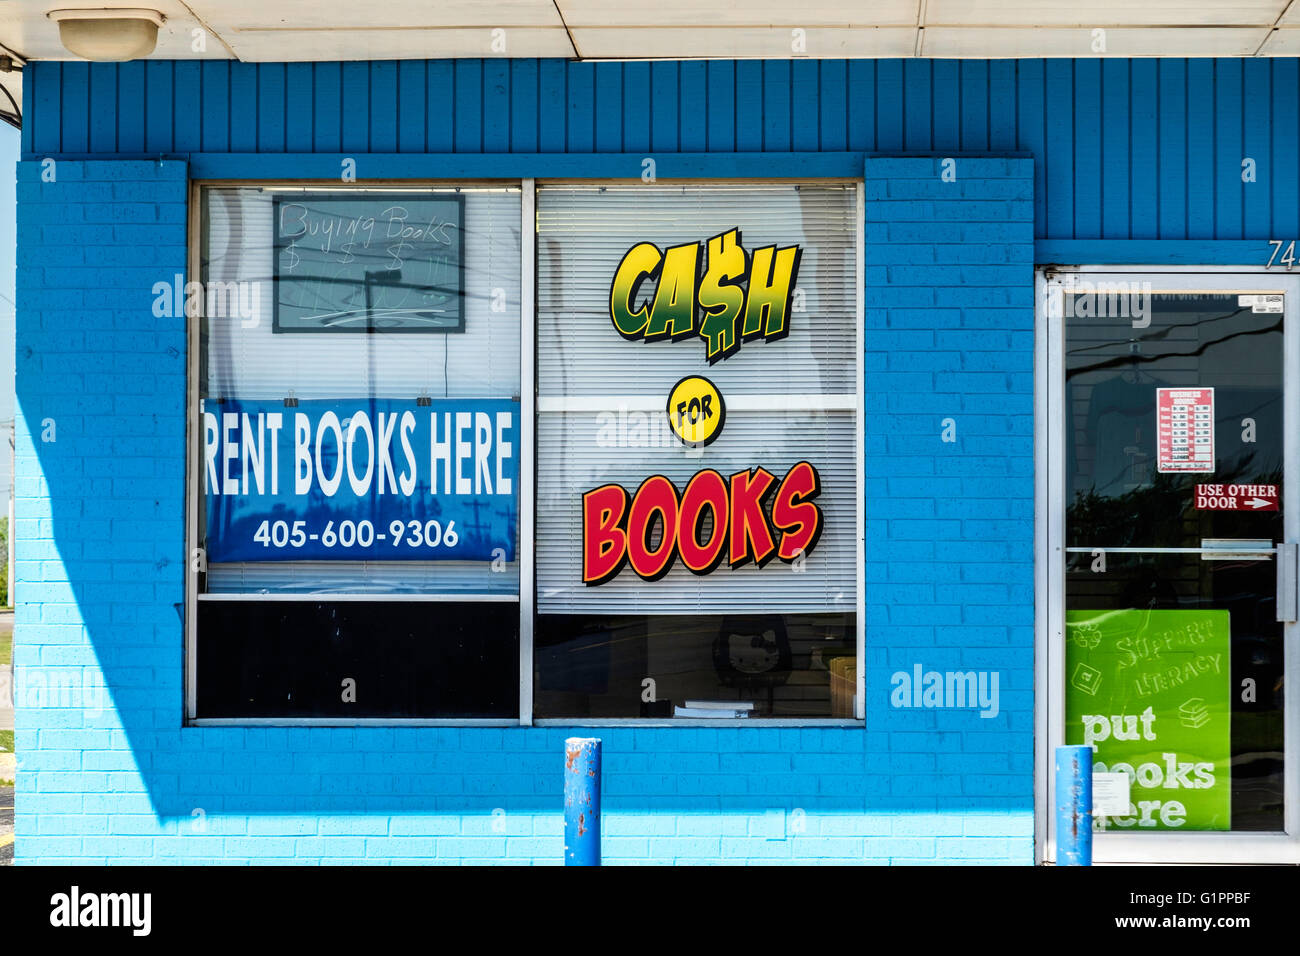 The storefront and window dressing advertising a textbook brokerage, buying and selling textbooks. USA. Stock Photo